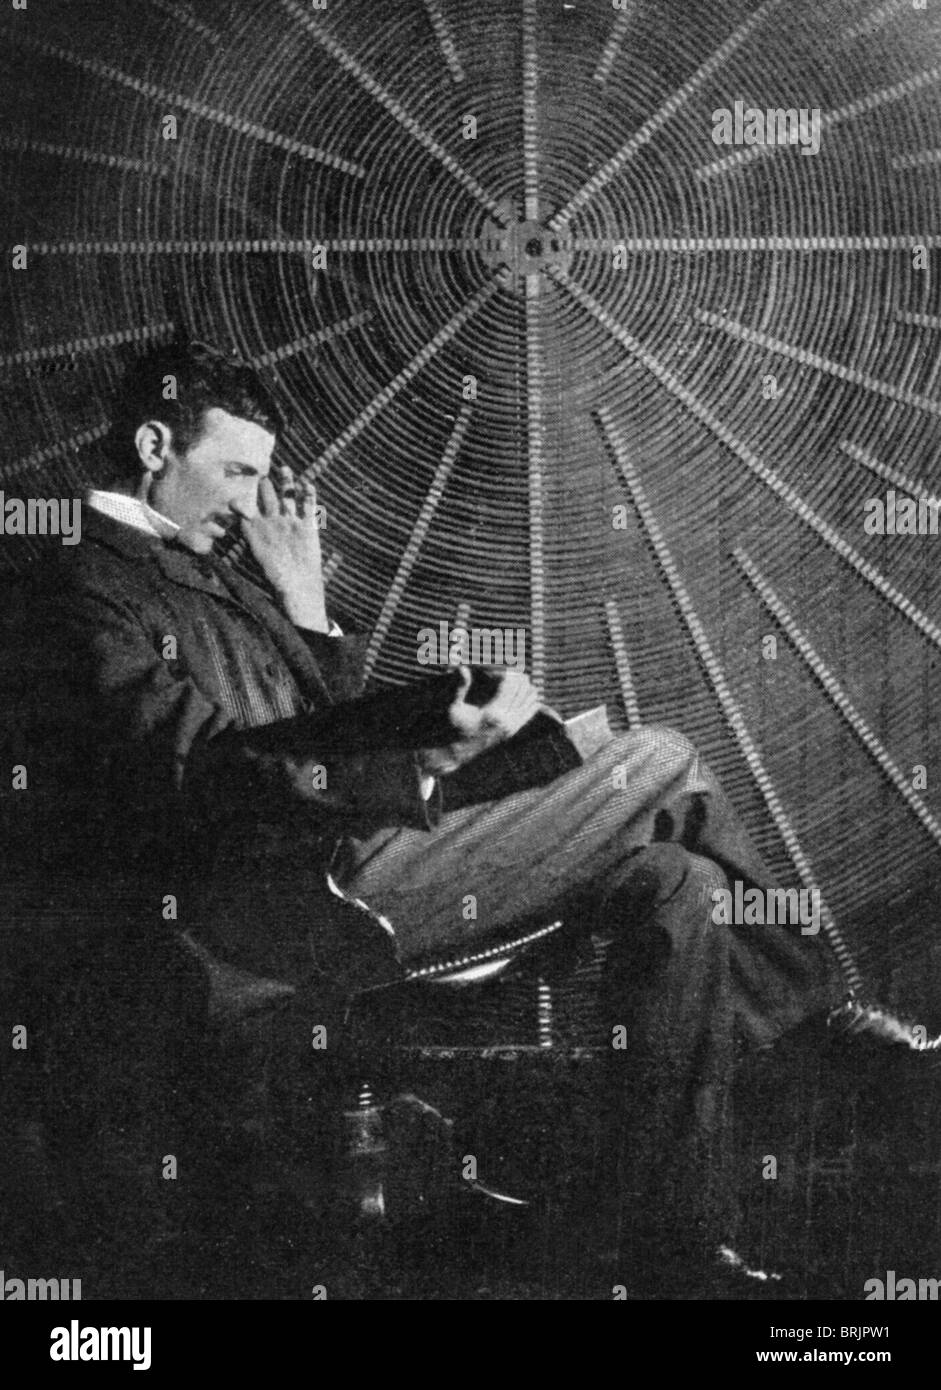 NIKOLA TESLA  (1856-1943) Serbian inventor in front of the spiral coil of his high-frequency transformer - see Description below Stock Photo